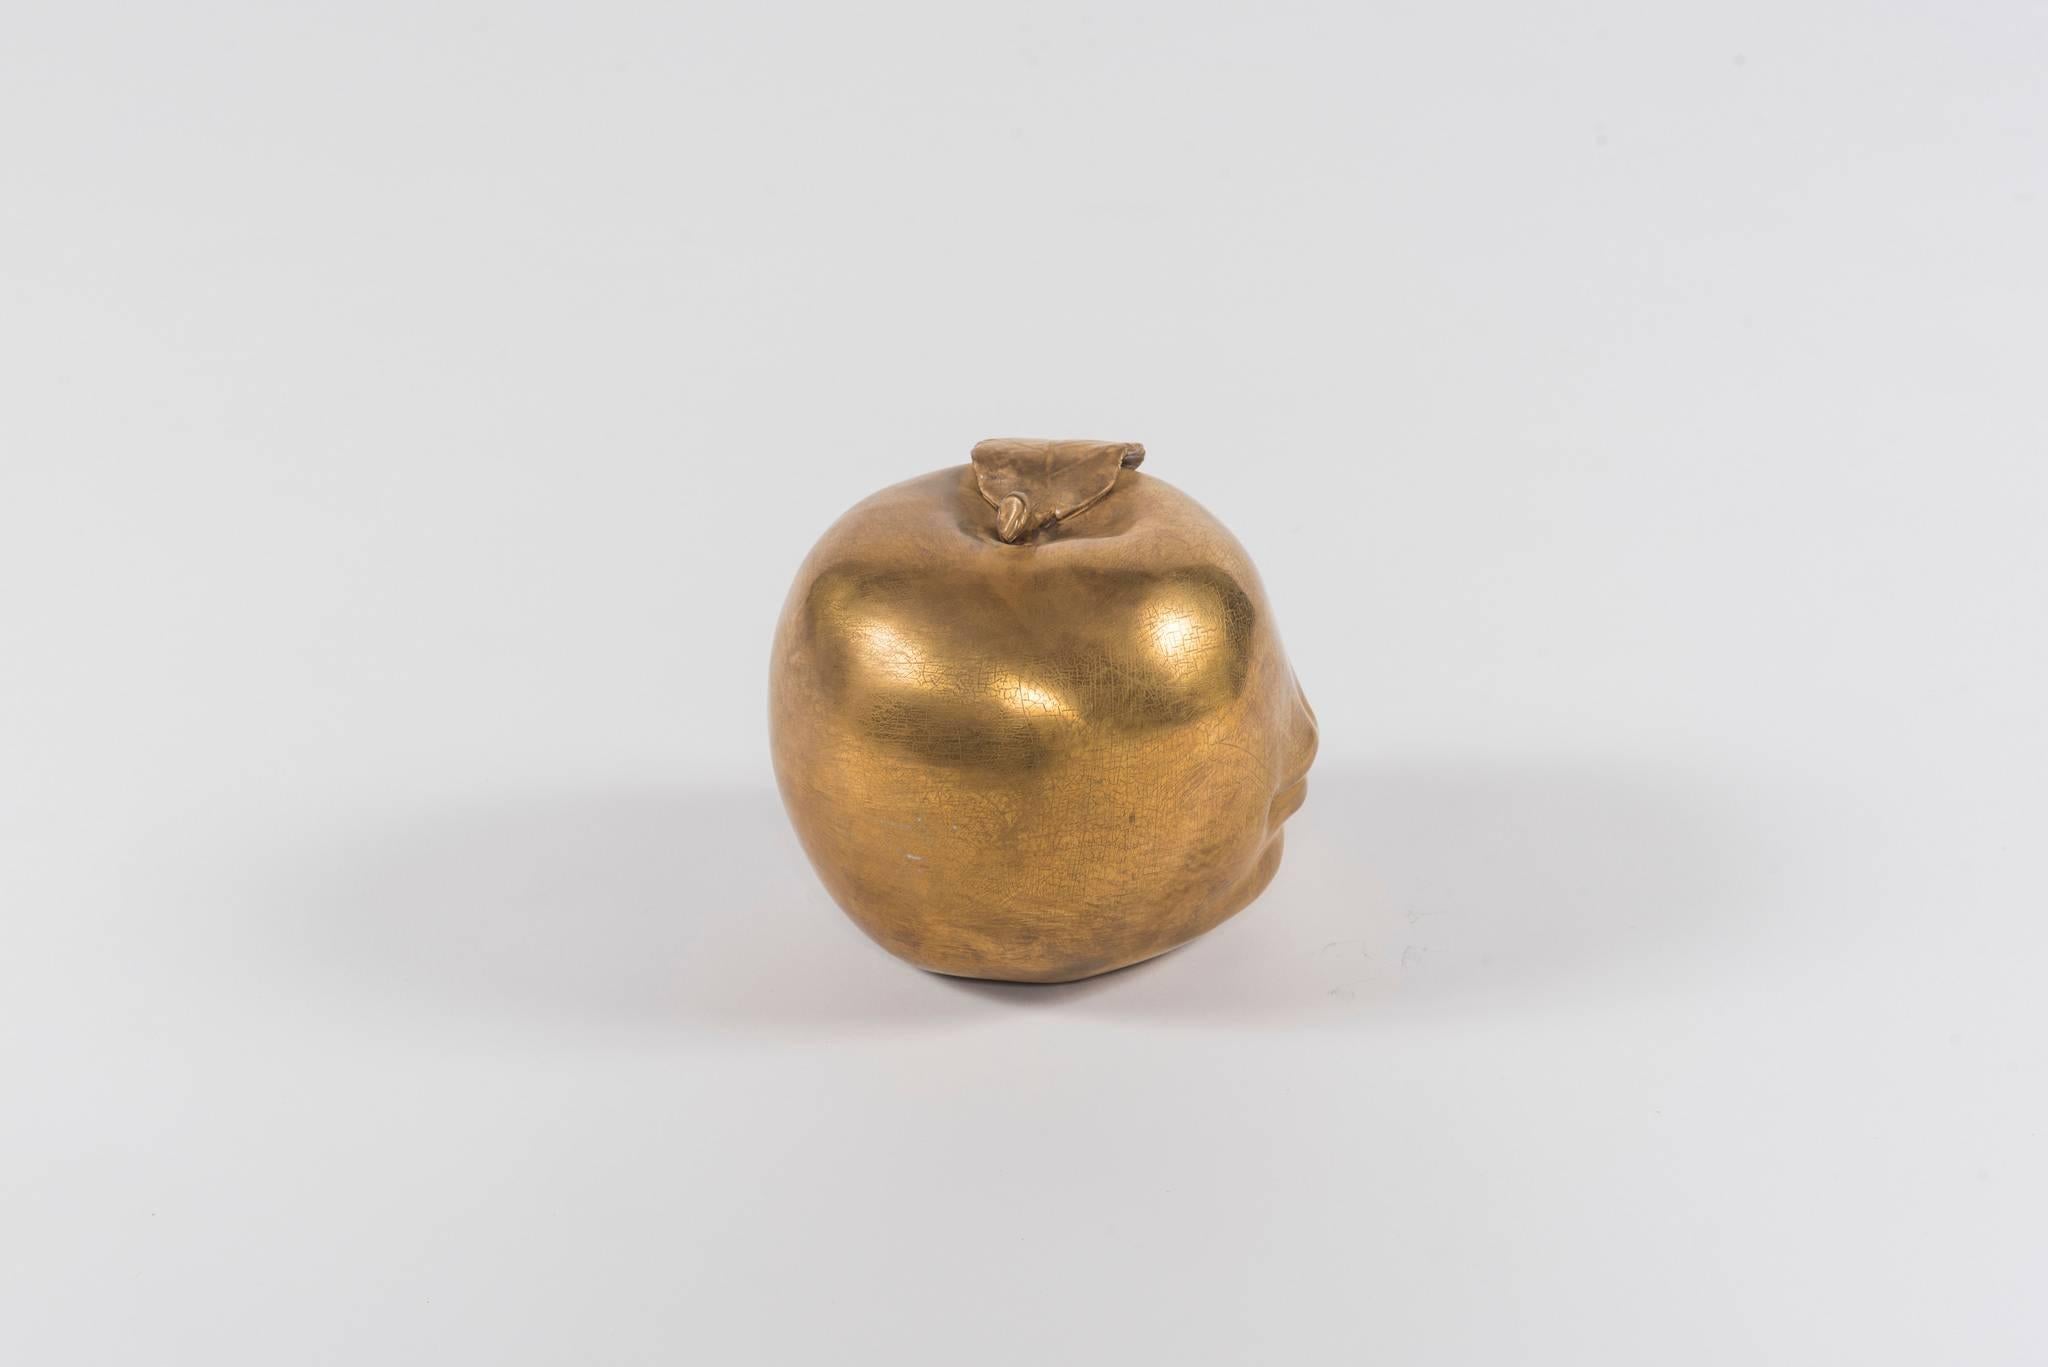 A surreal 22-karat glazed bisque pommel apple in the style of Lalanne. A perfect bibelot for any table, mantle or shelf.
 
Approximately 7 inch diameter x 6.75 inch height.
    